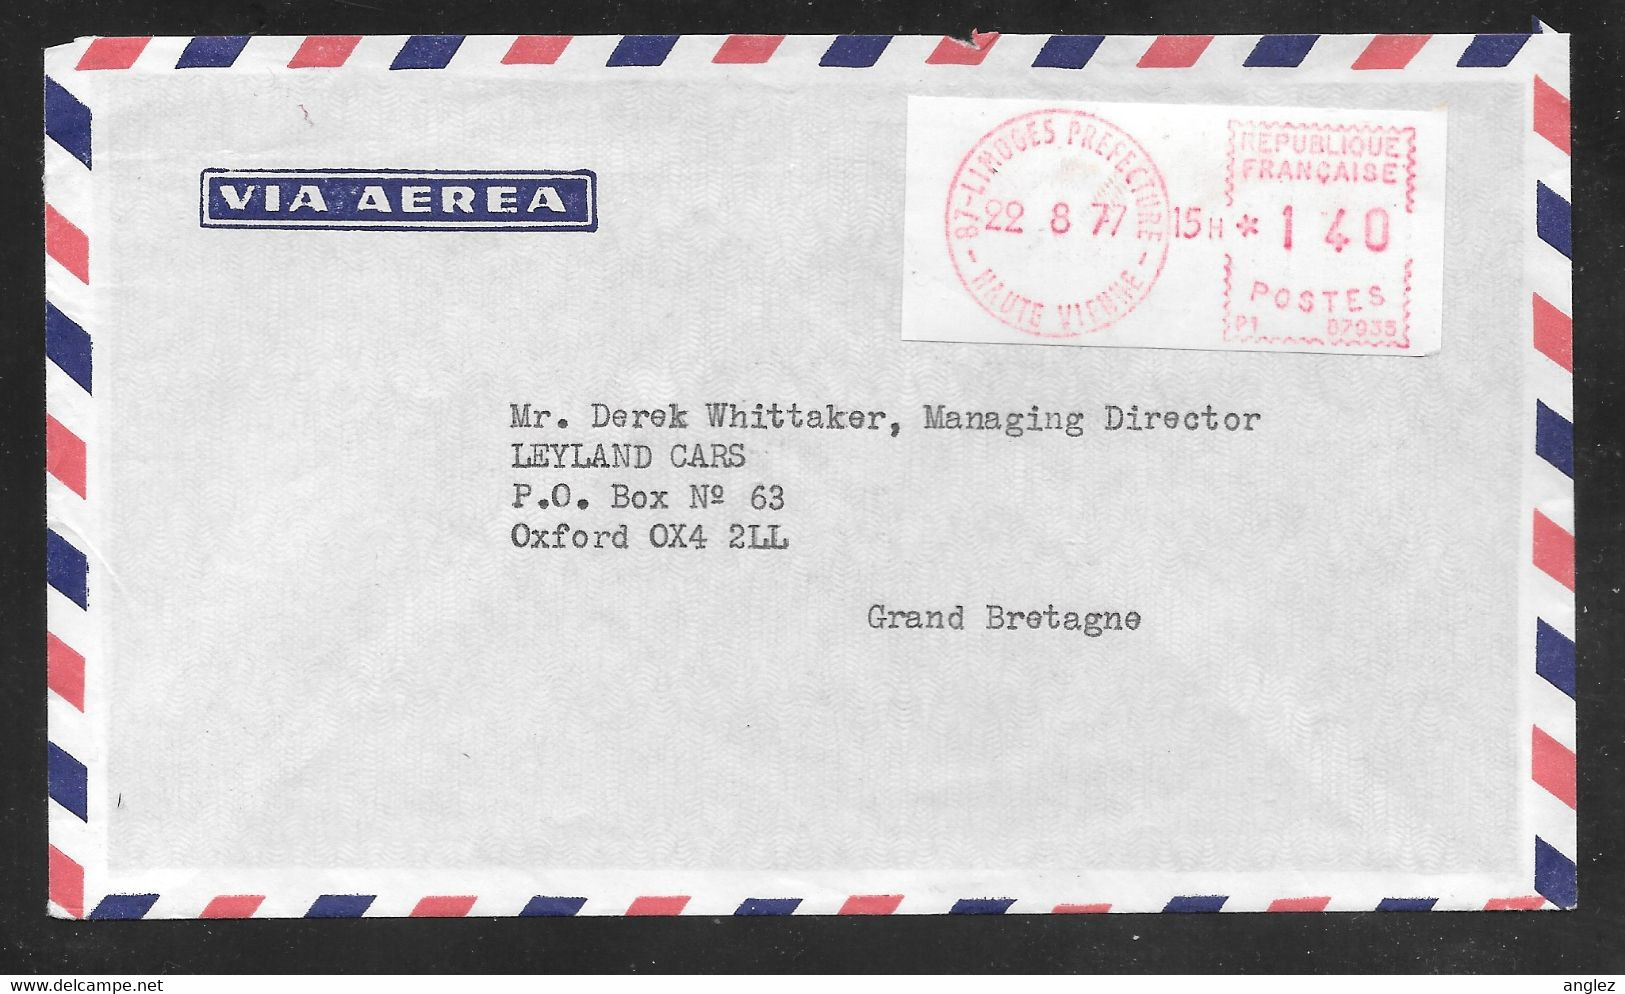 France - 1977 Airmail Cover - Limoges To England - Franking Label - 1969 Montgeron – Wit Papier – Frama/Satas